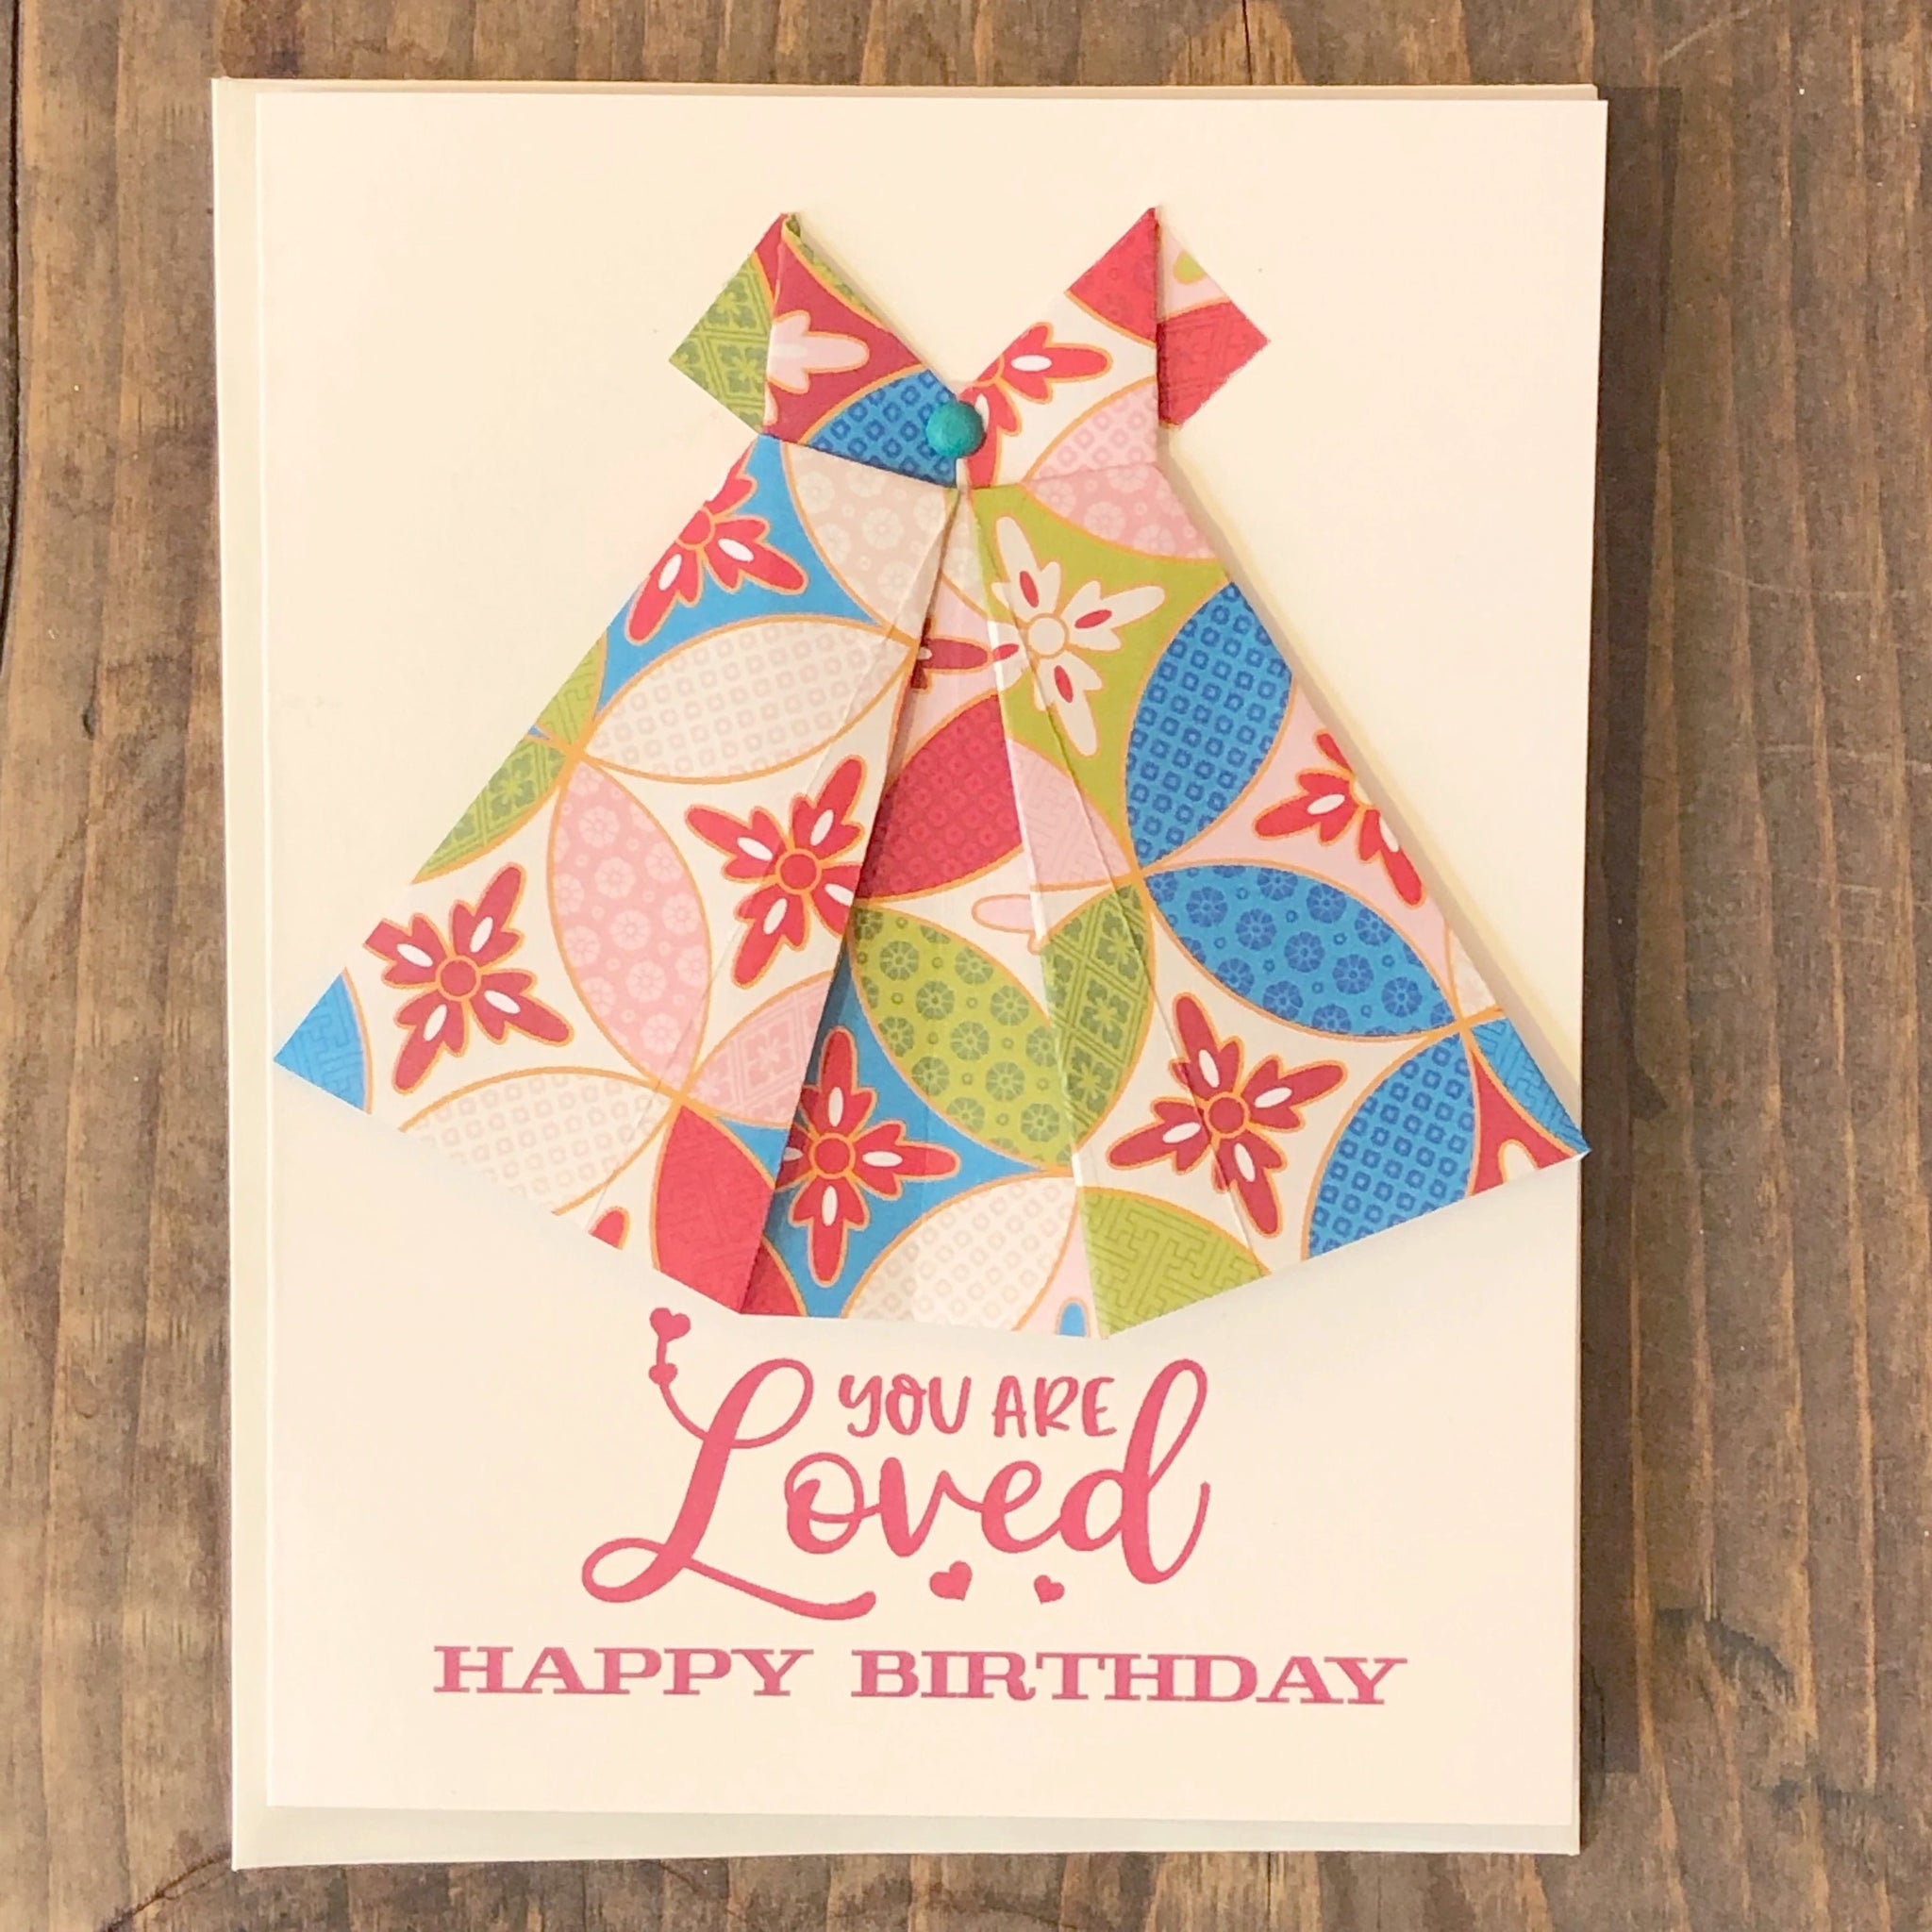 You are loved Birthday Dress Card Virginia Fitzgerald